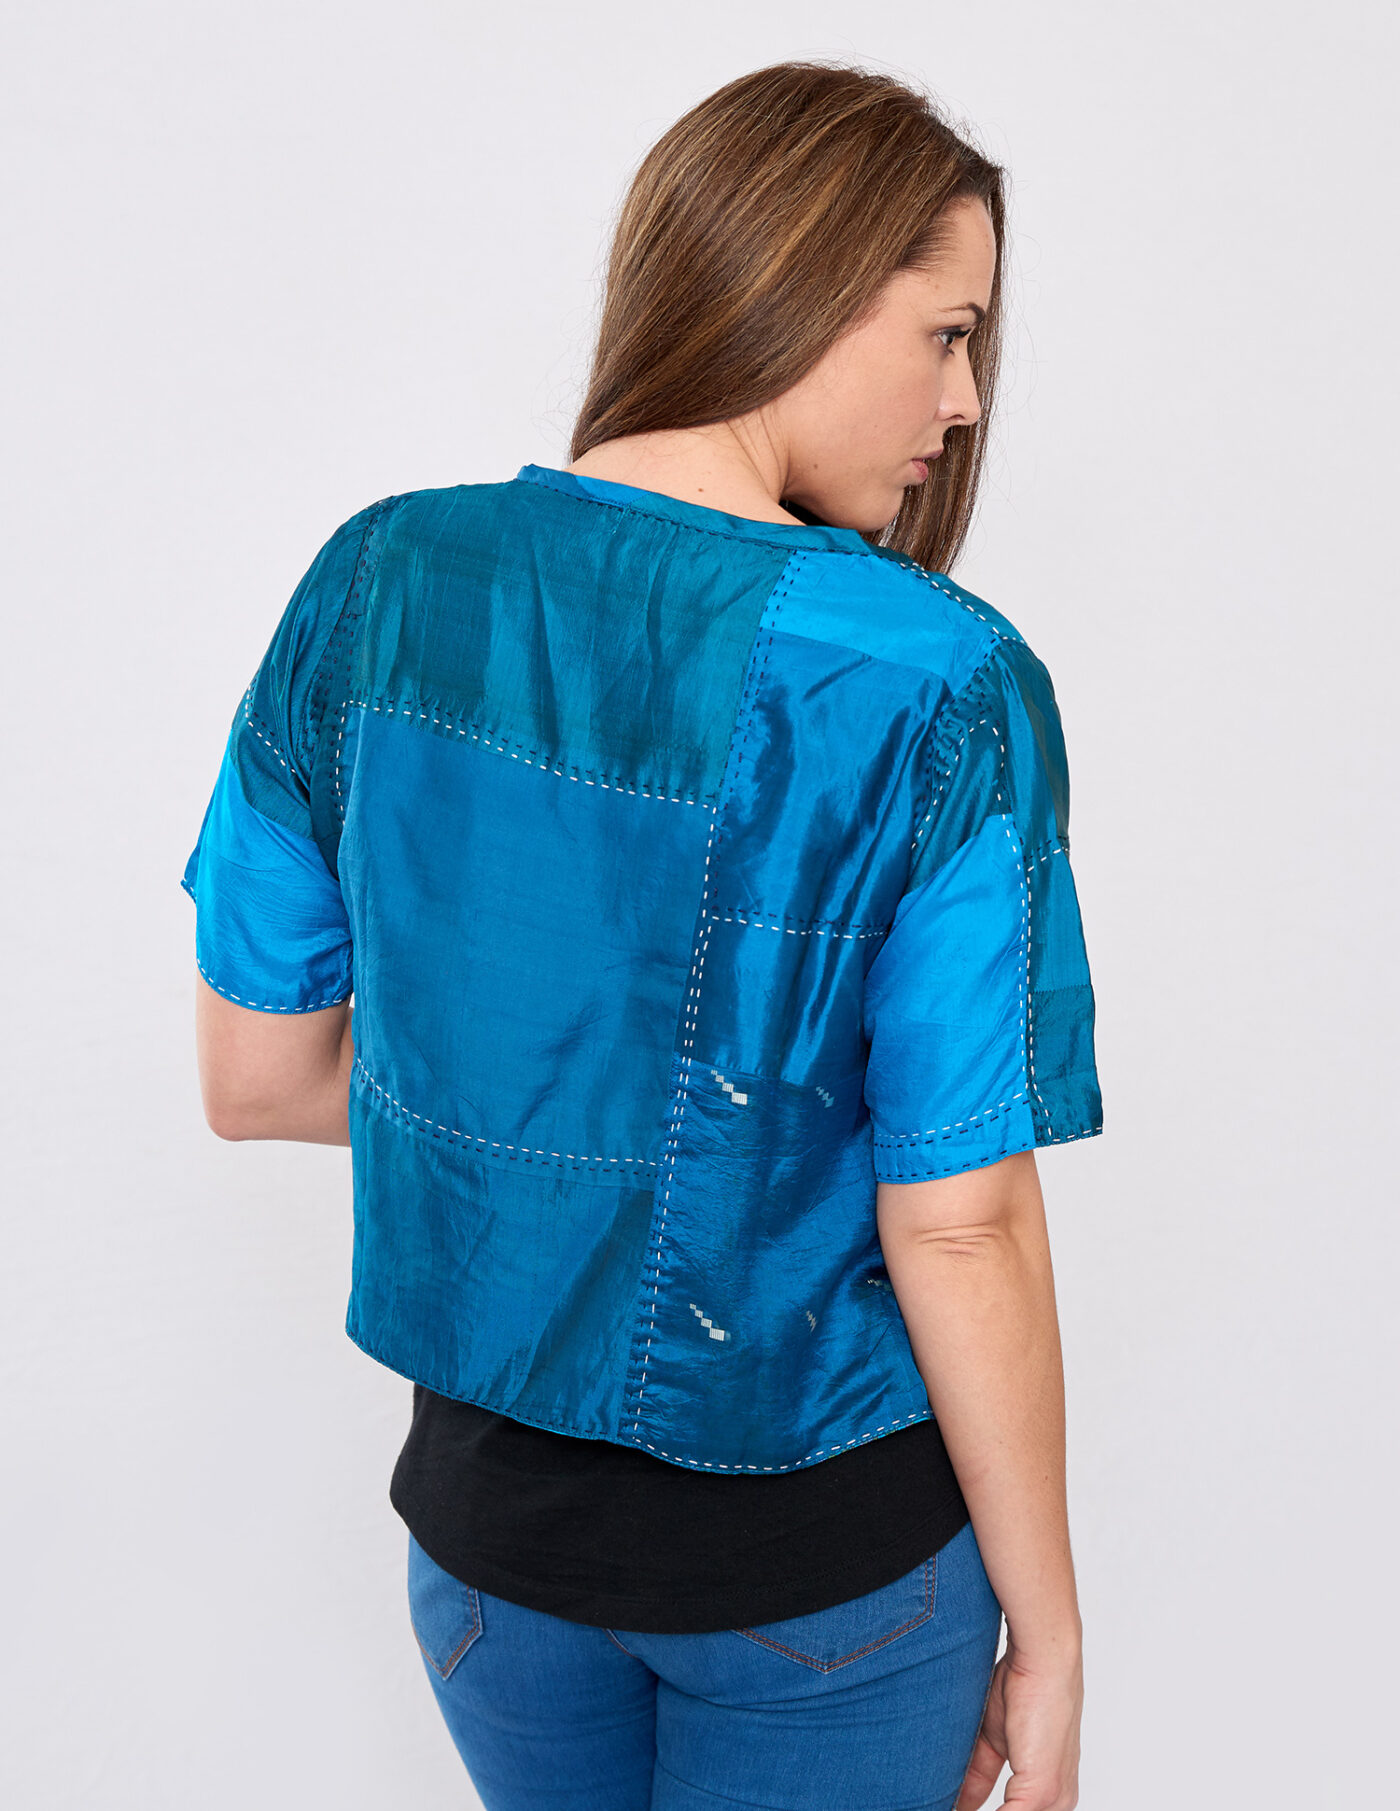 Teal Pure Silk Hand Stitched Ladies Cover-up